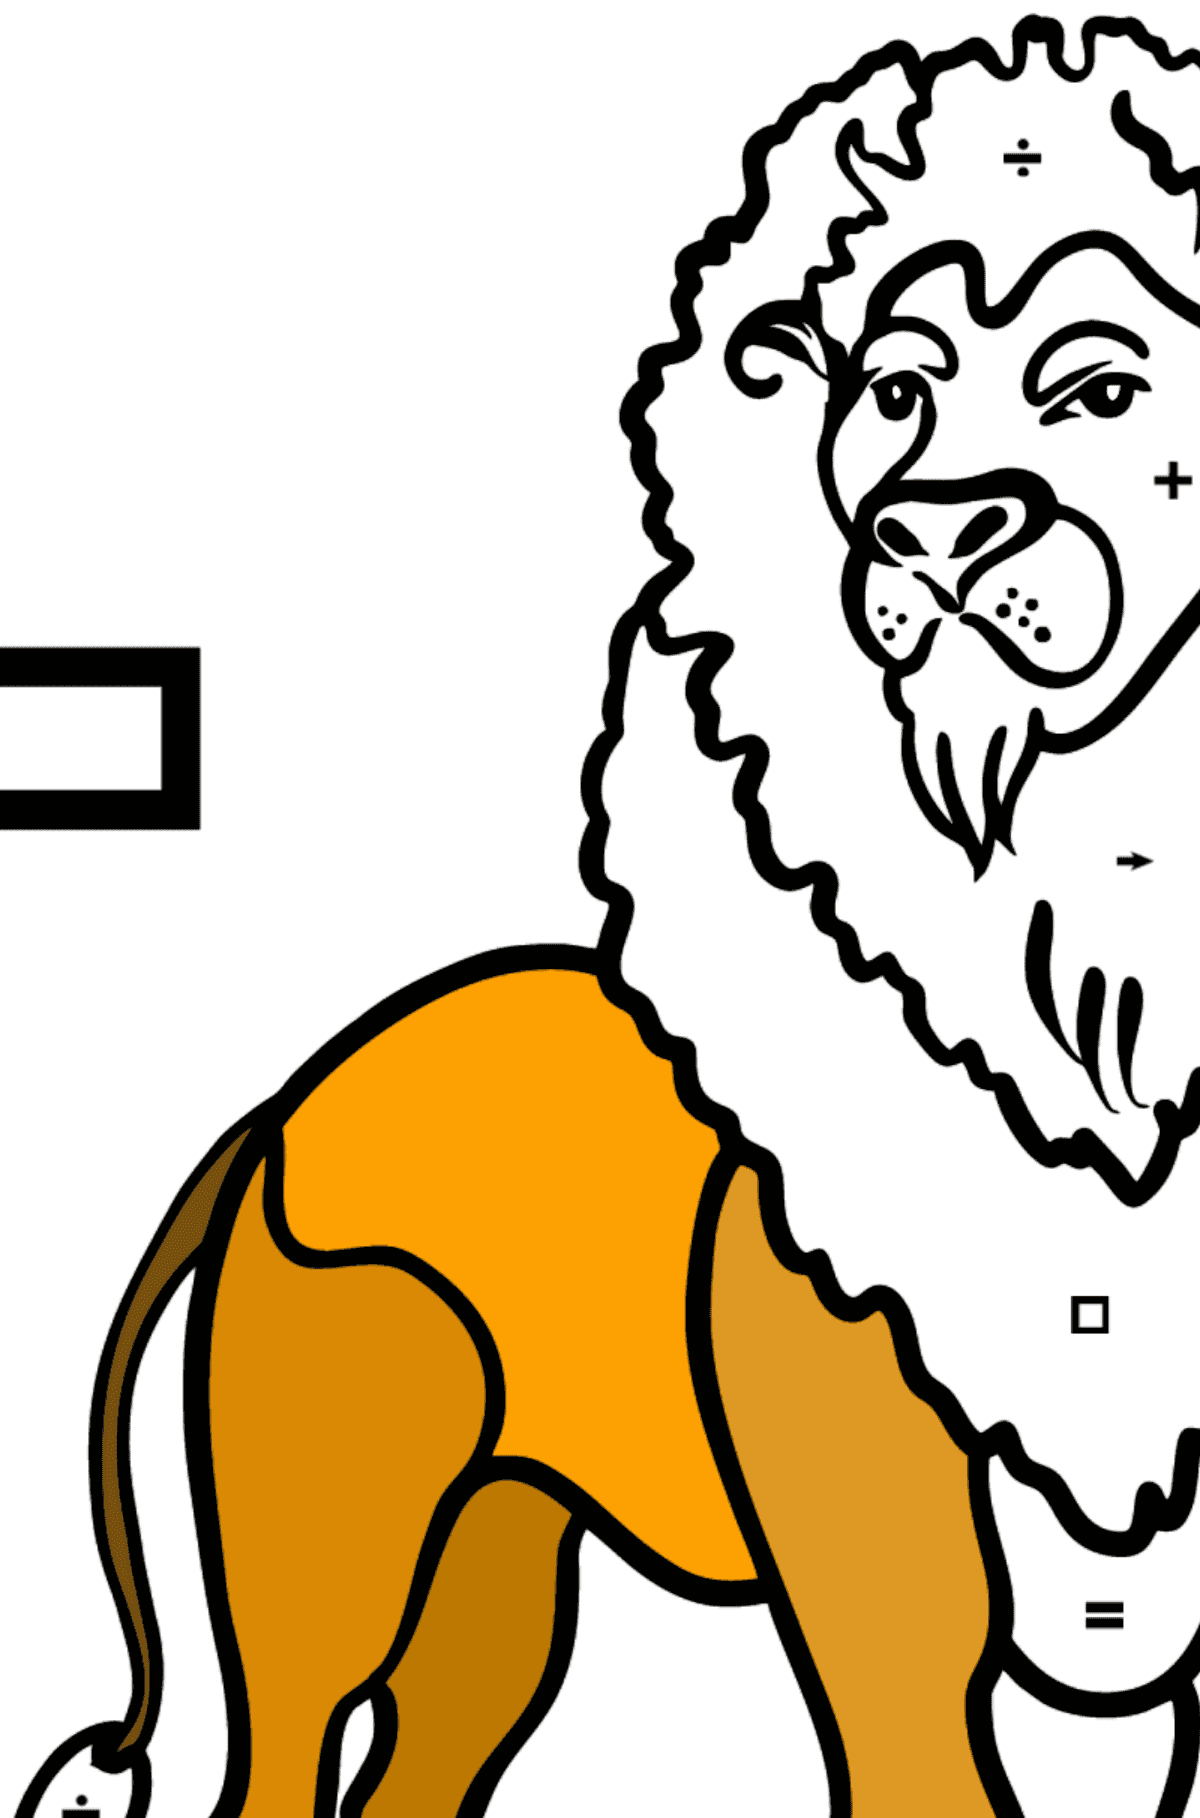 English Letter L coloring pages - LION - Coloring by Symbols for Kids